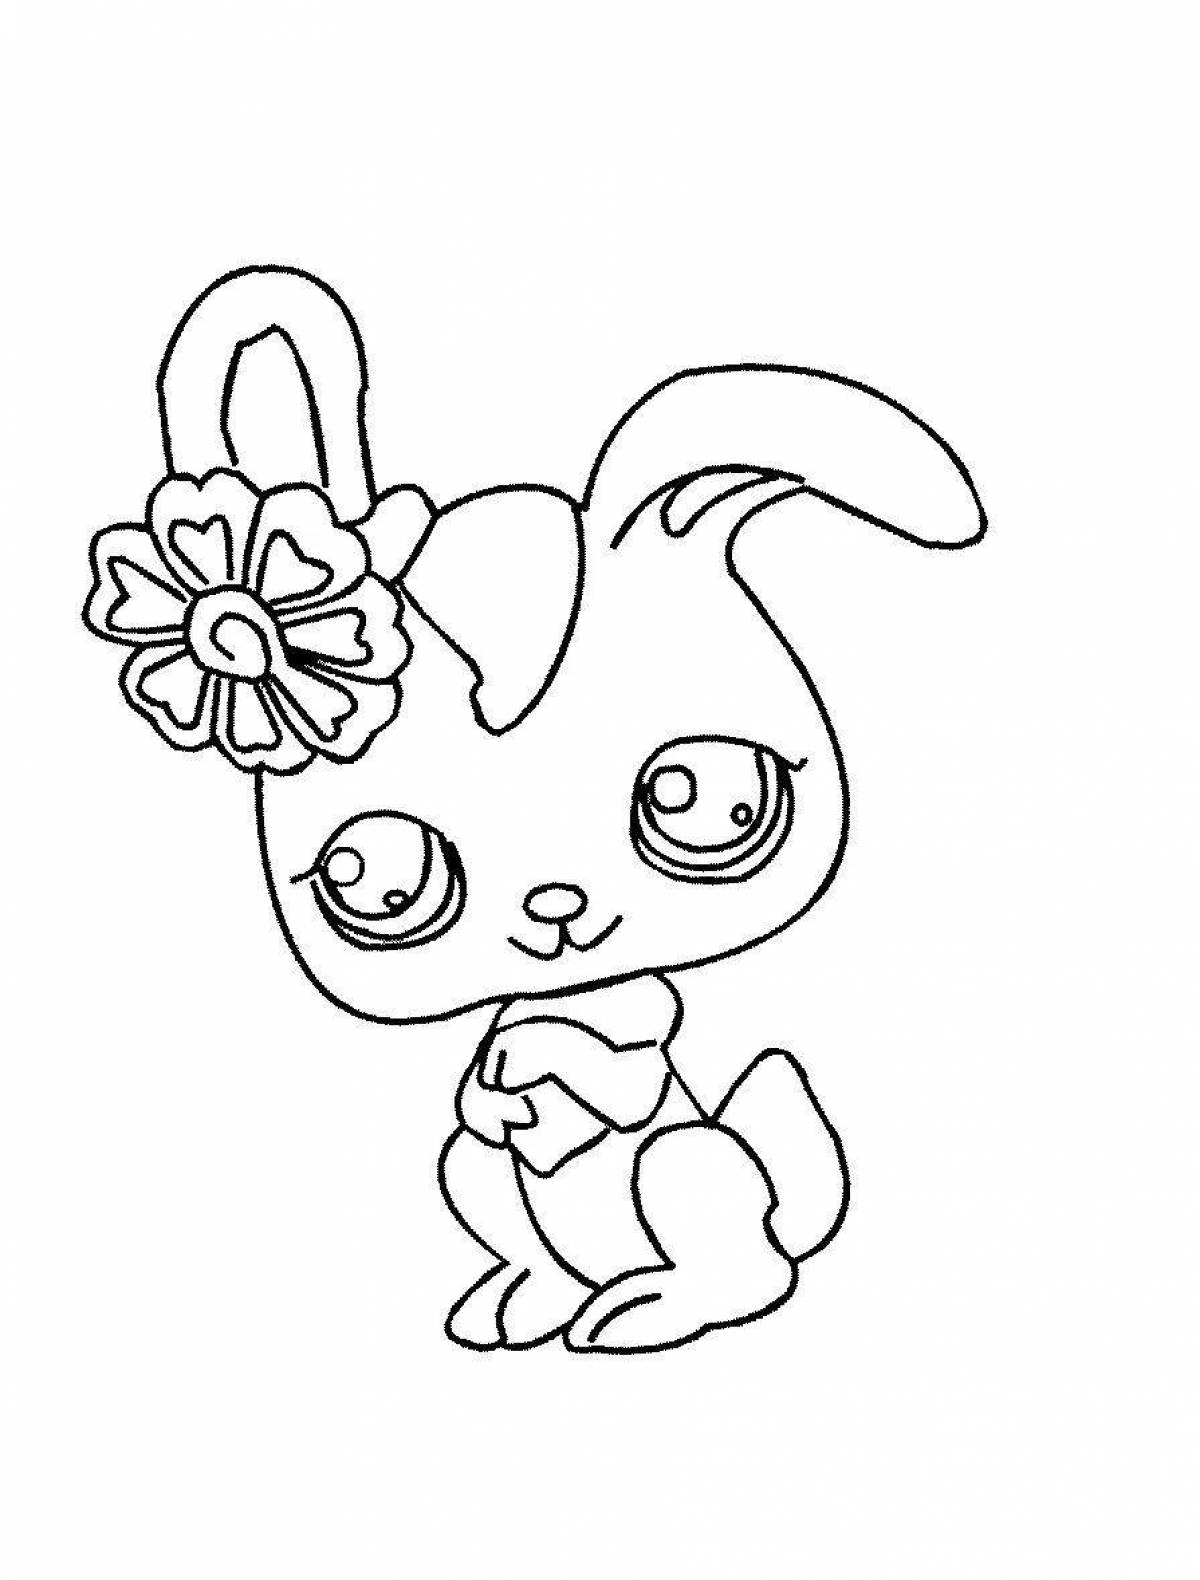 Lps fat coloring page